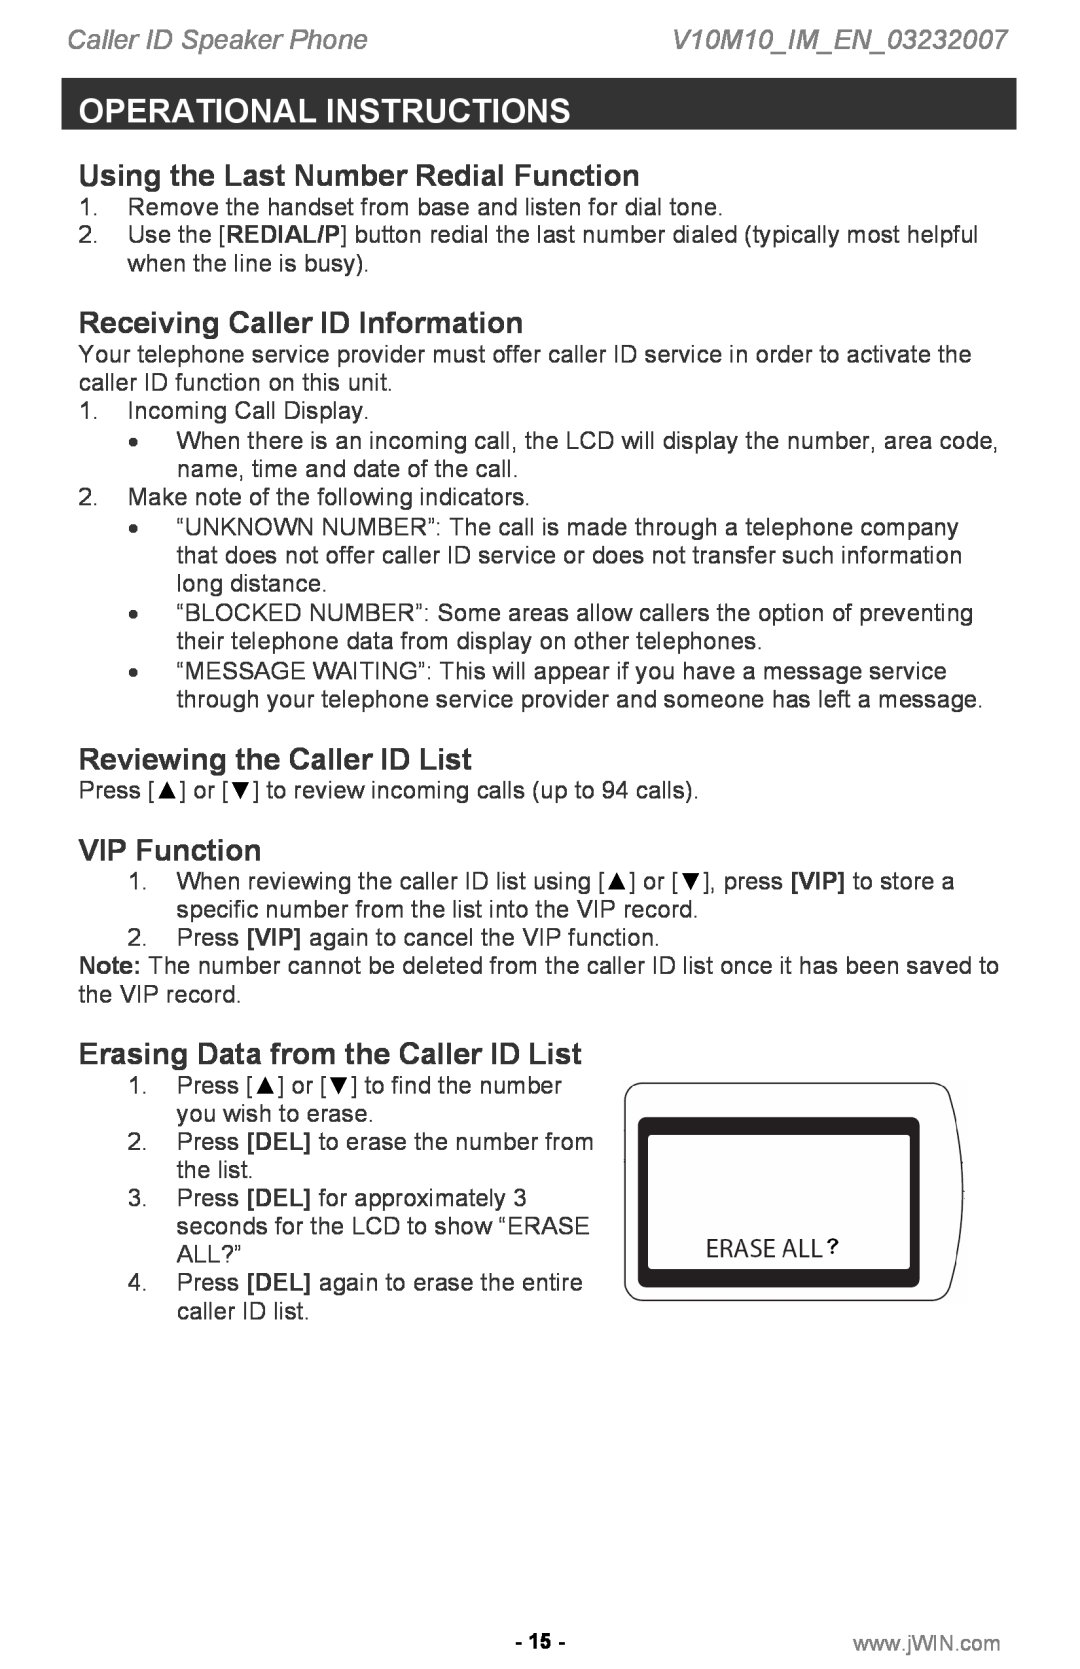 Jwin P531 Using the Last Number Redial Function, Receiving Caller ID Information, Reviewing the Caller ID List 